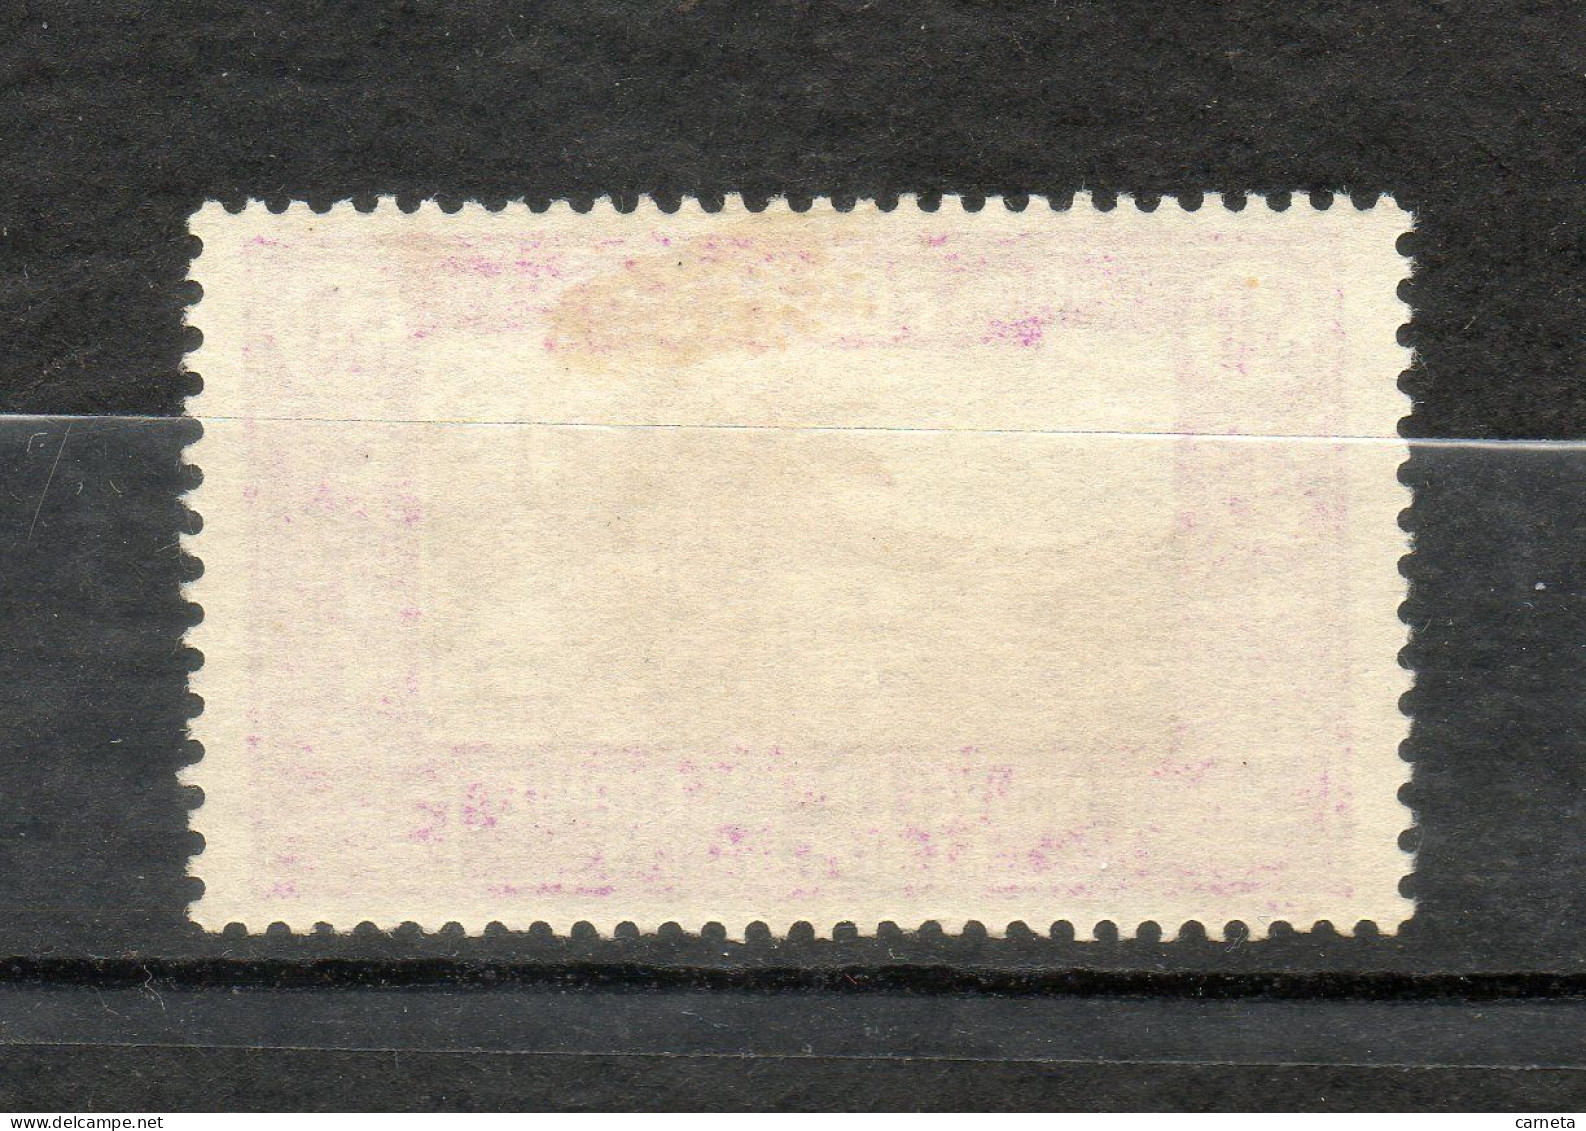 Nlle CALEDONIE N° 150  OBLITERE COTE 1.25€   CASE PAYSAGE - Used Stamps